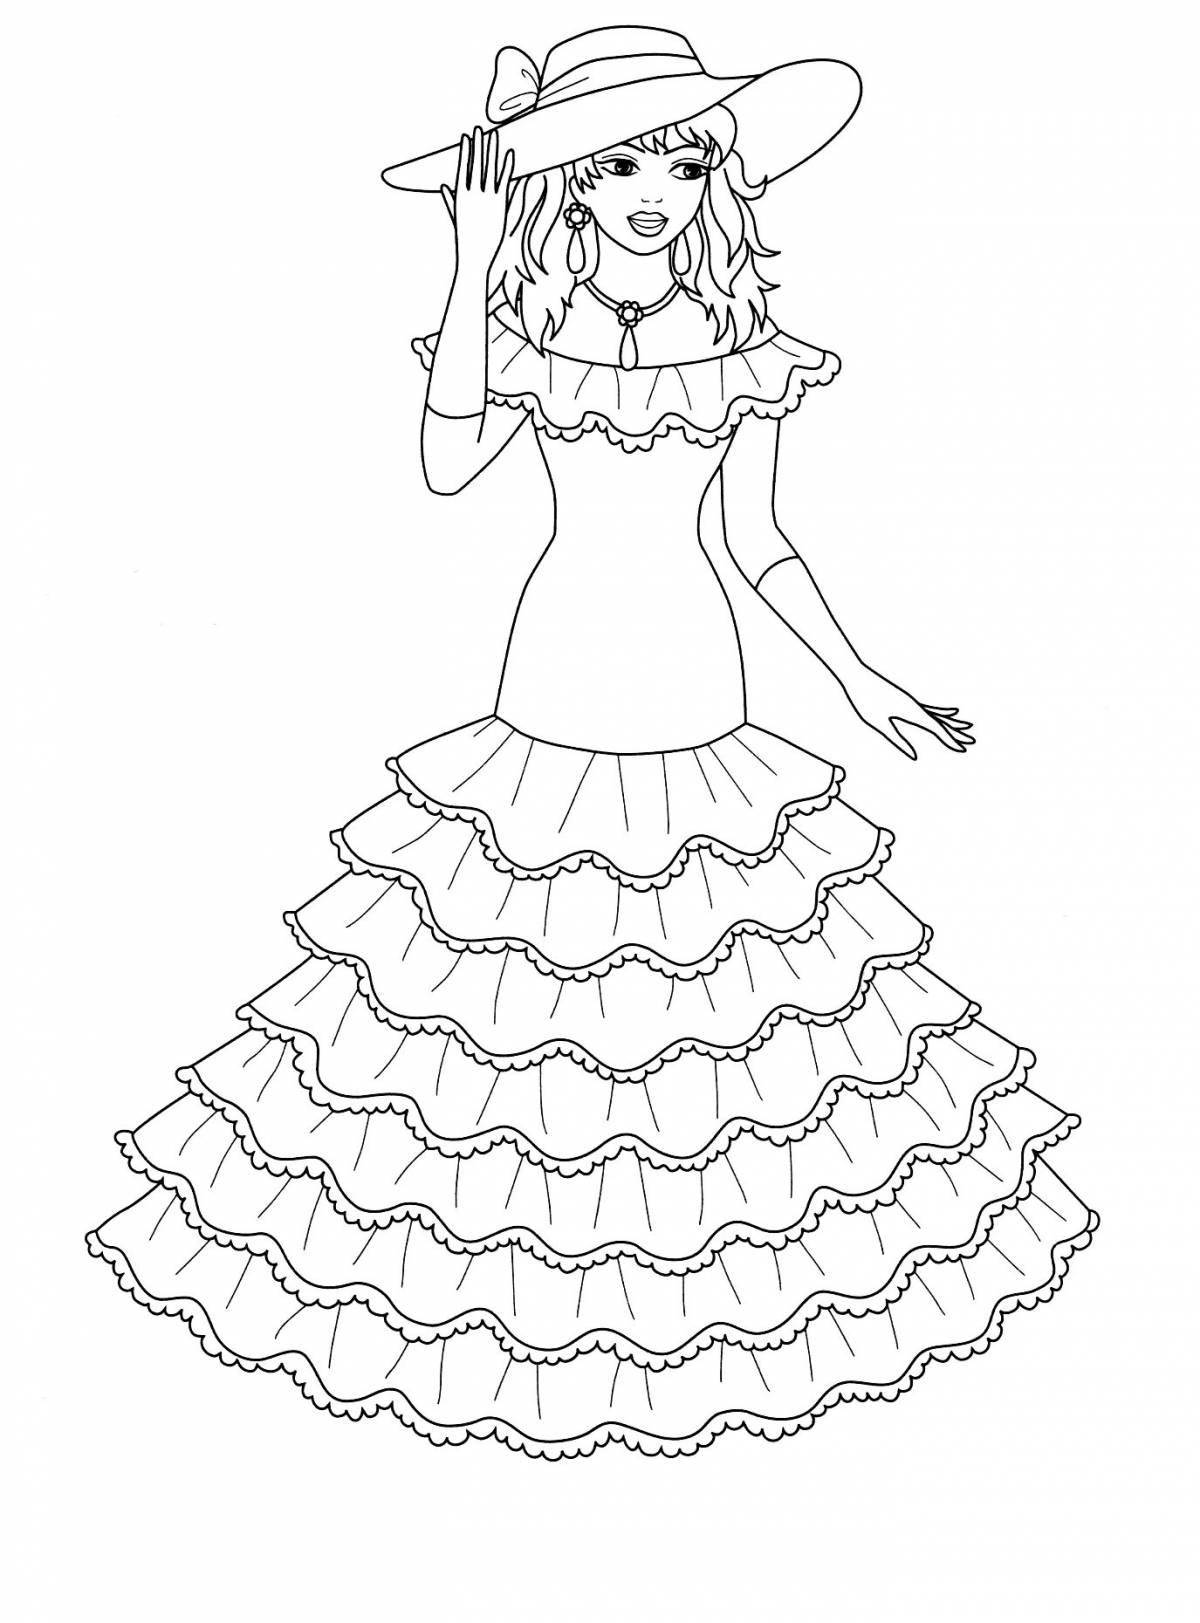 Shiny coloring book for girls beautiful princesses